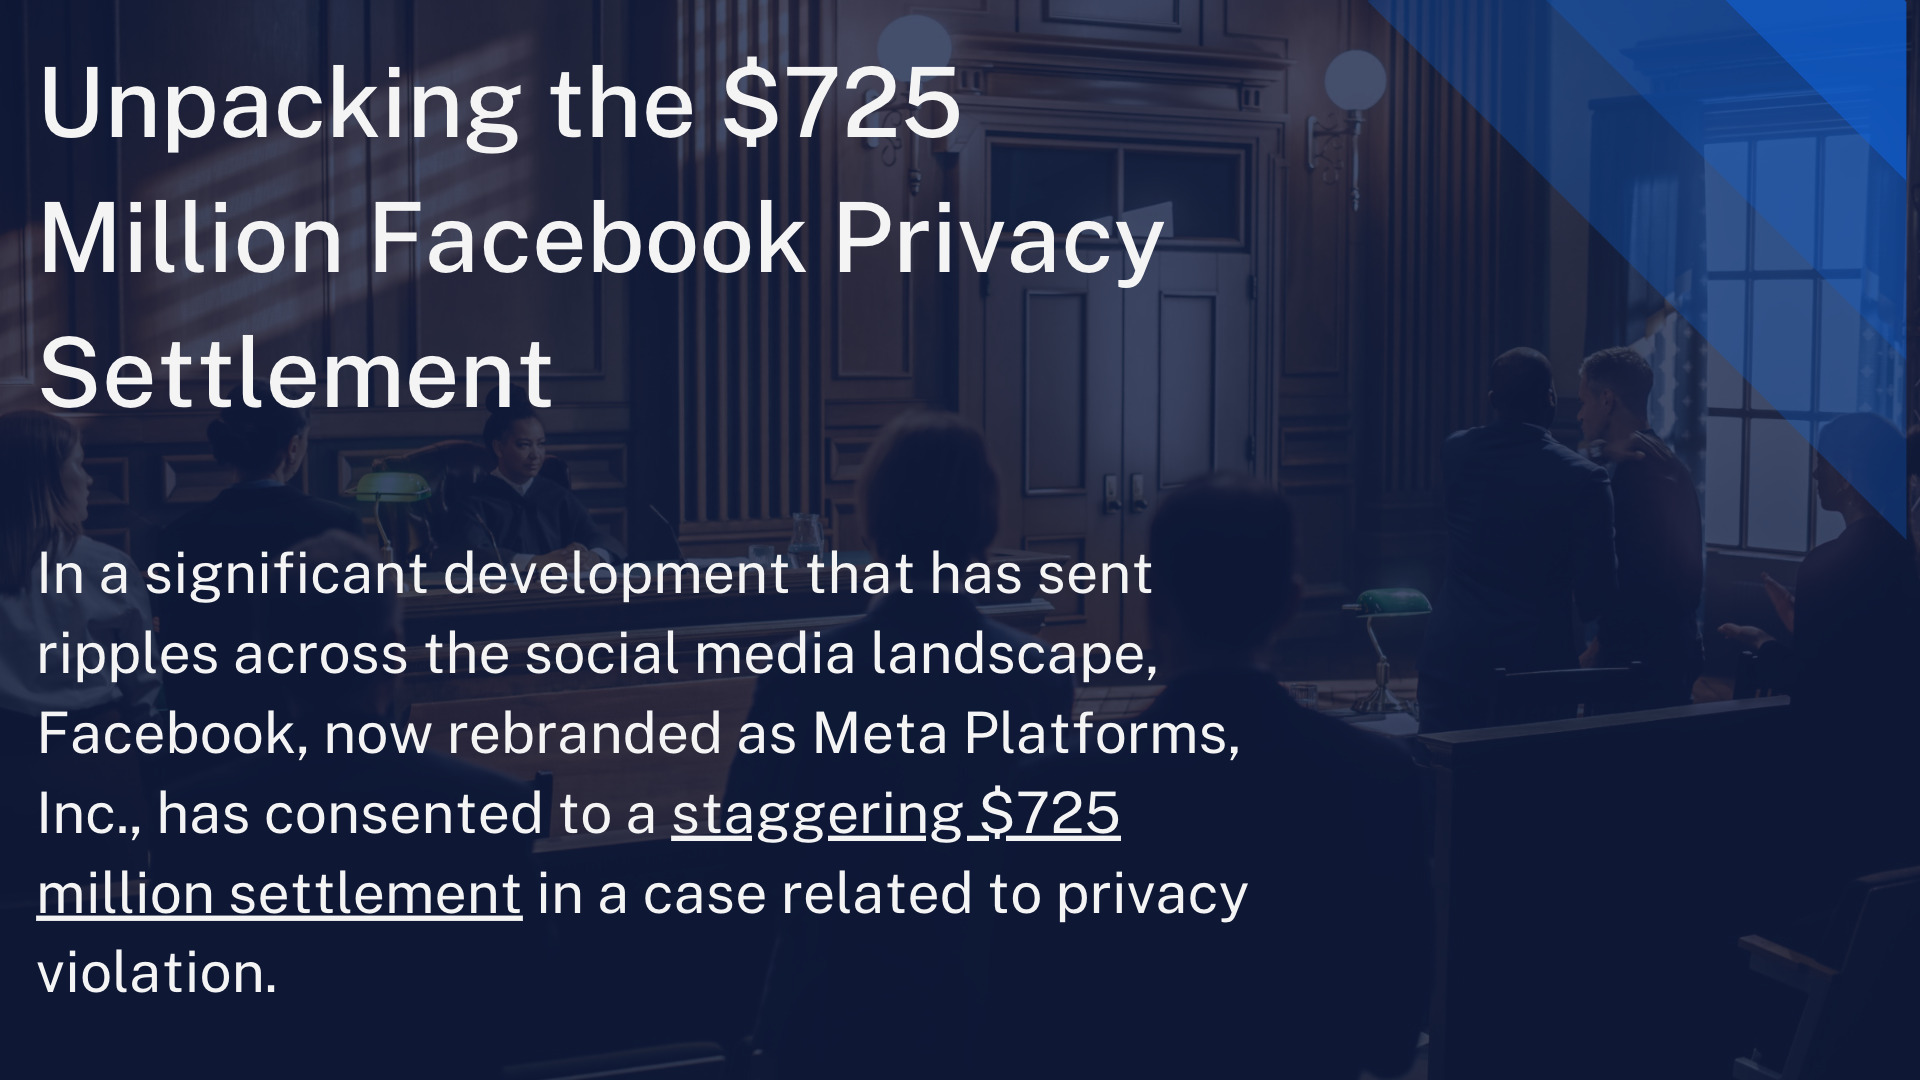 Unpacking the $725 Million Facebook Privacy Settlement